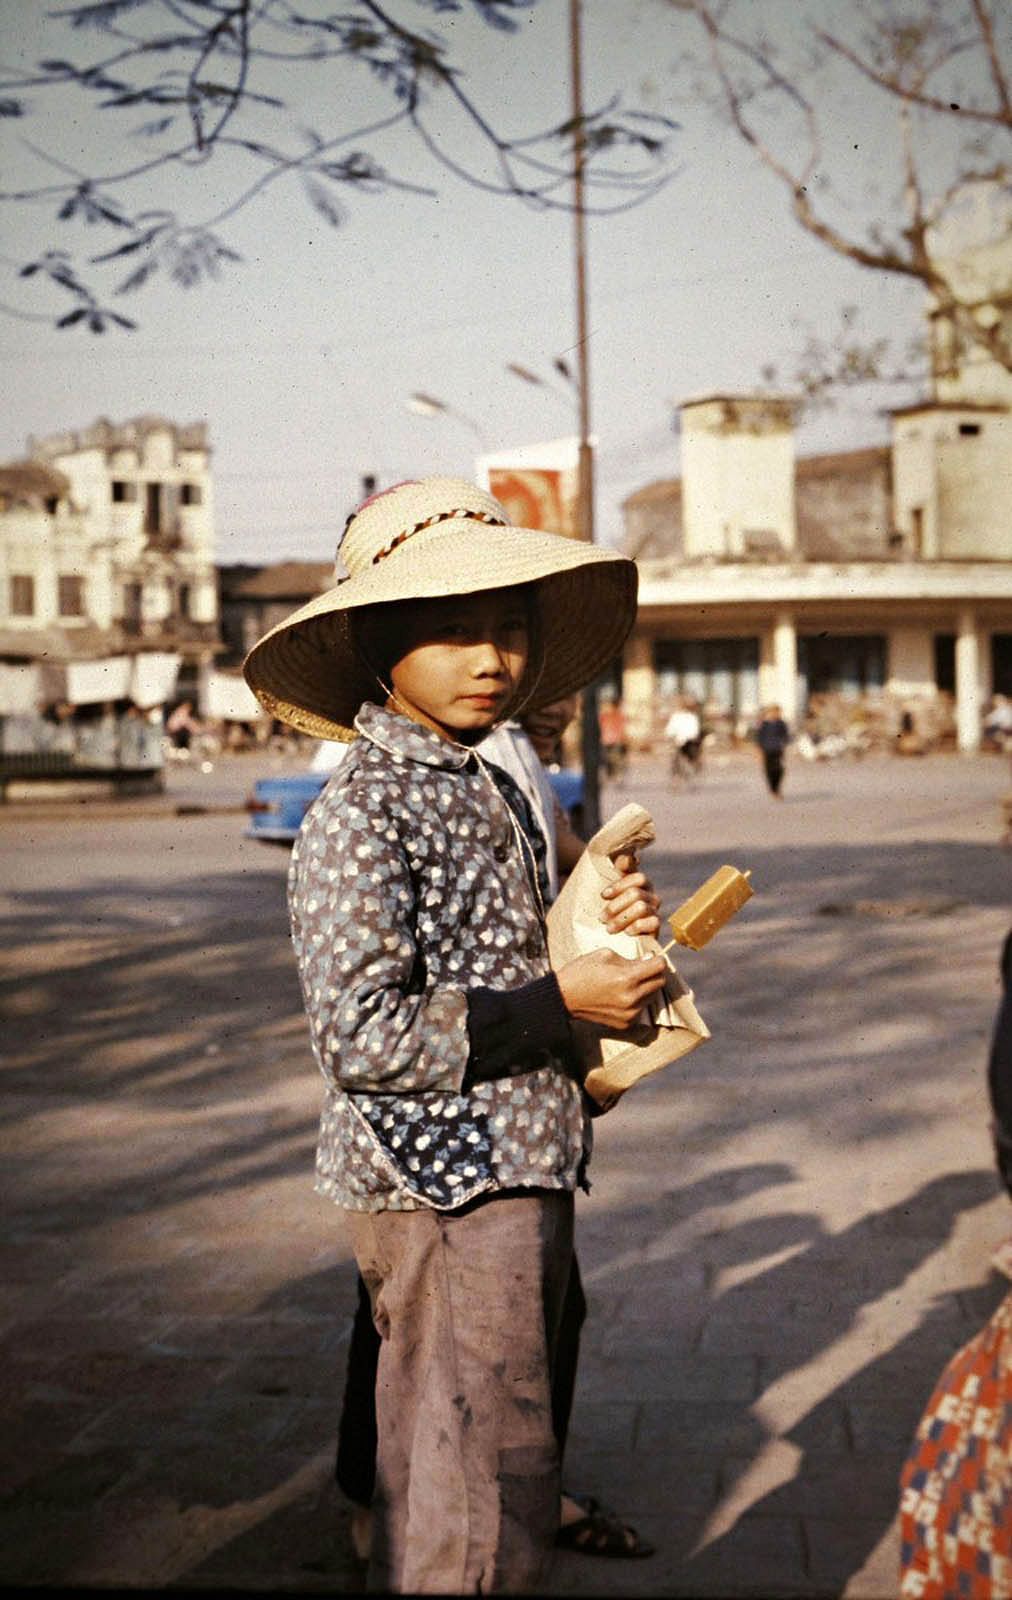 [Photos] On Hanoi’s Streets in 1979: Trams, Bicycles, Buffaloes and ...